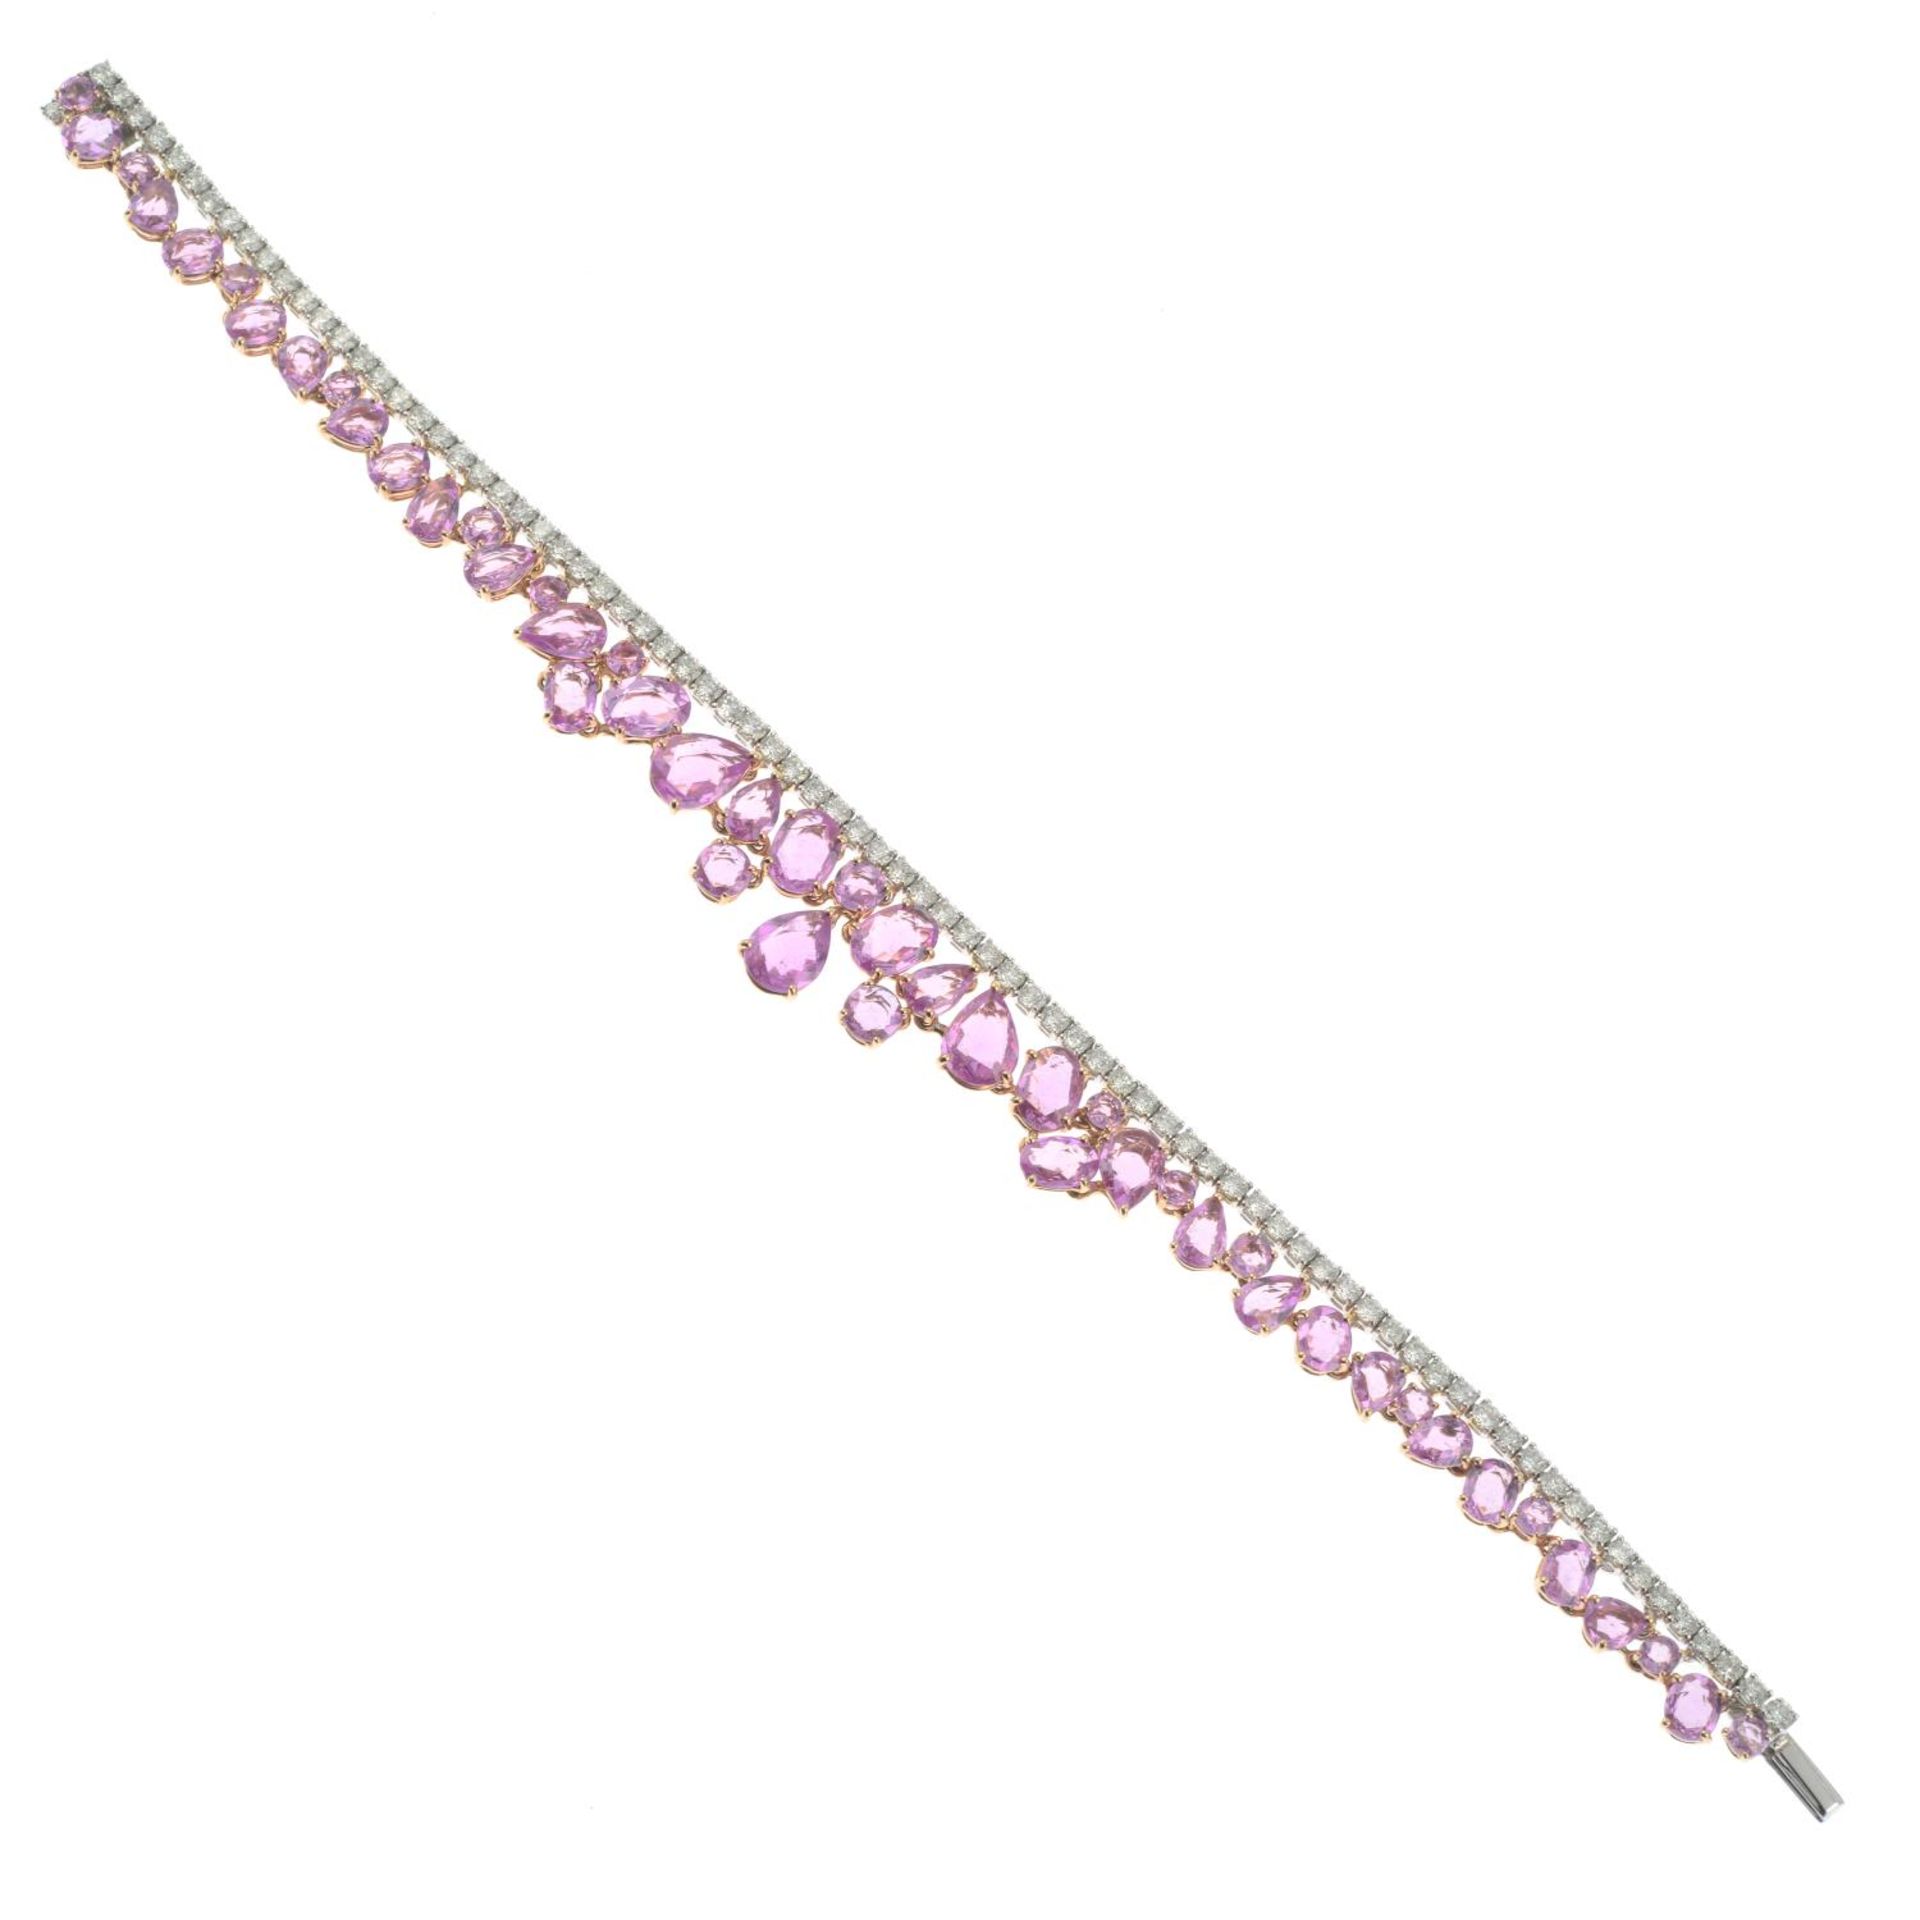 An 18ct gold pink sapphire and diamond 'Beneath the Rose' bracelet. - Image 2 of 3